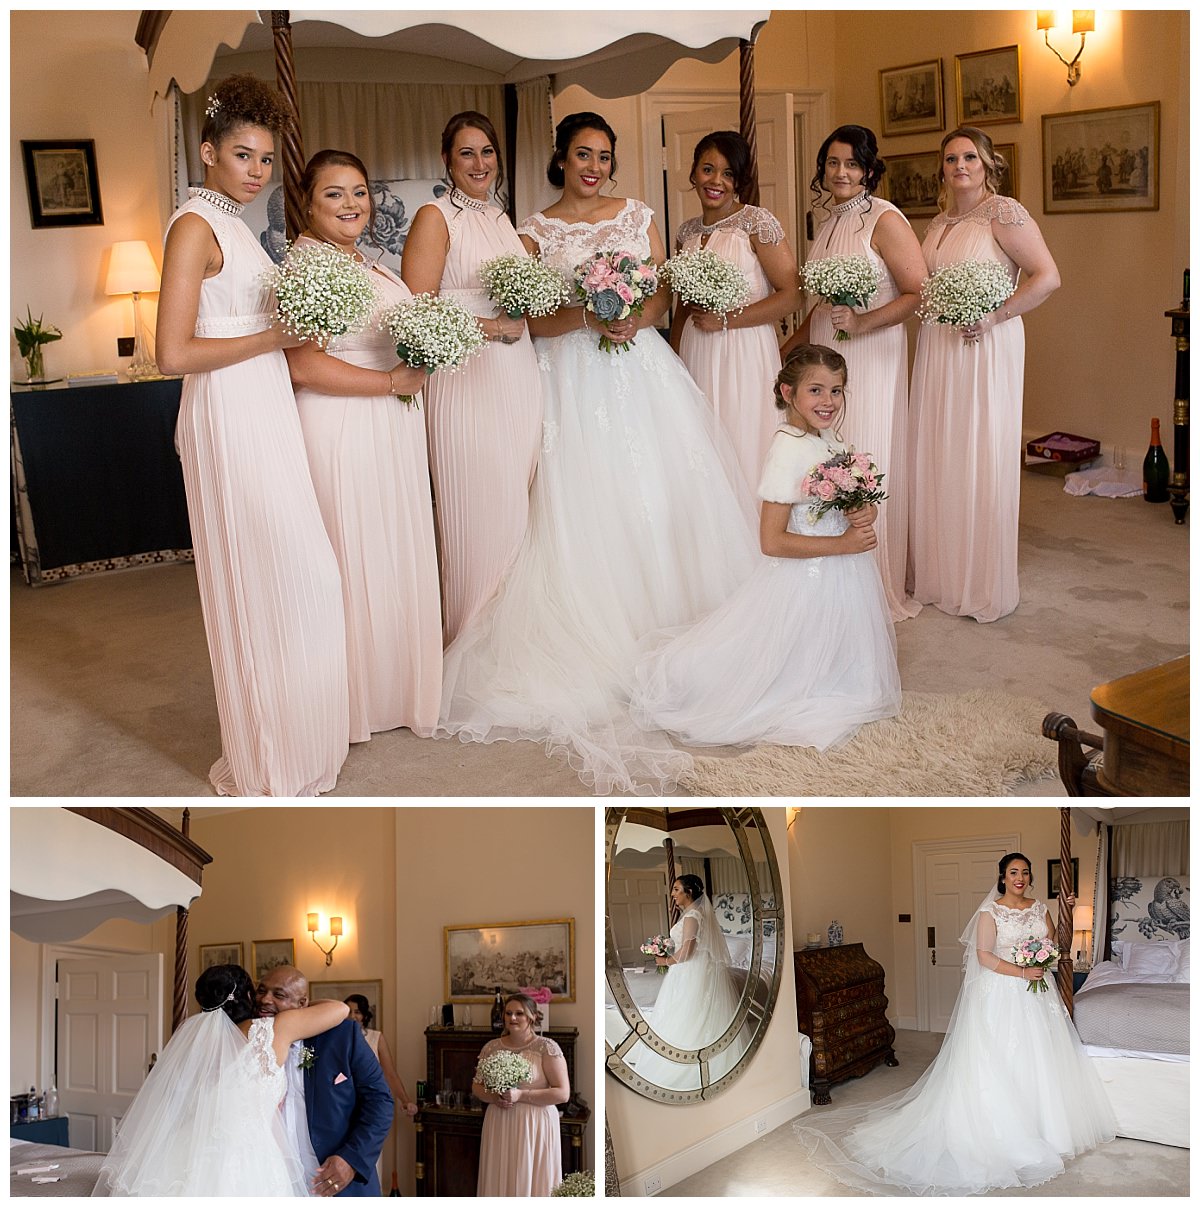 Bride and bridesmaids before the wedding ceremony